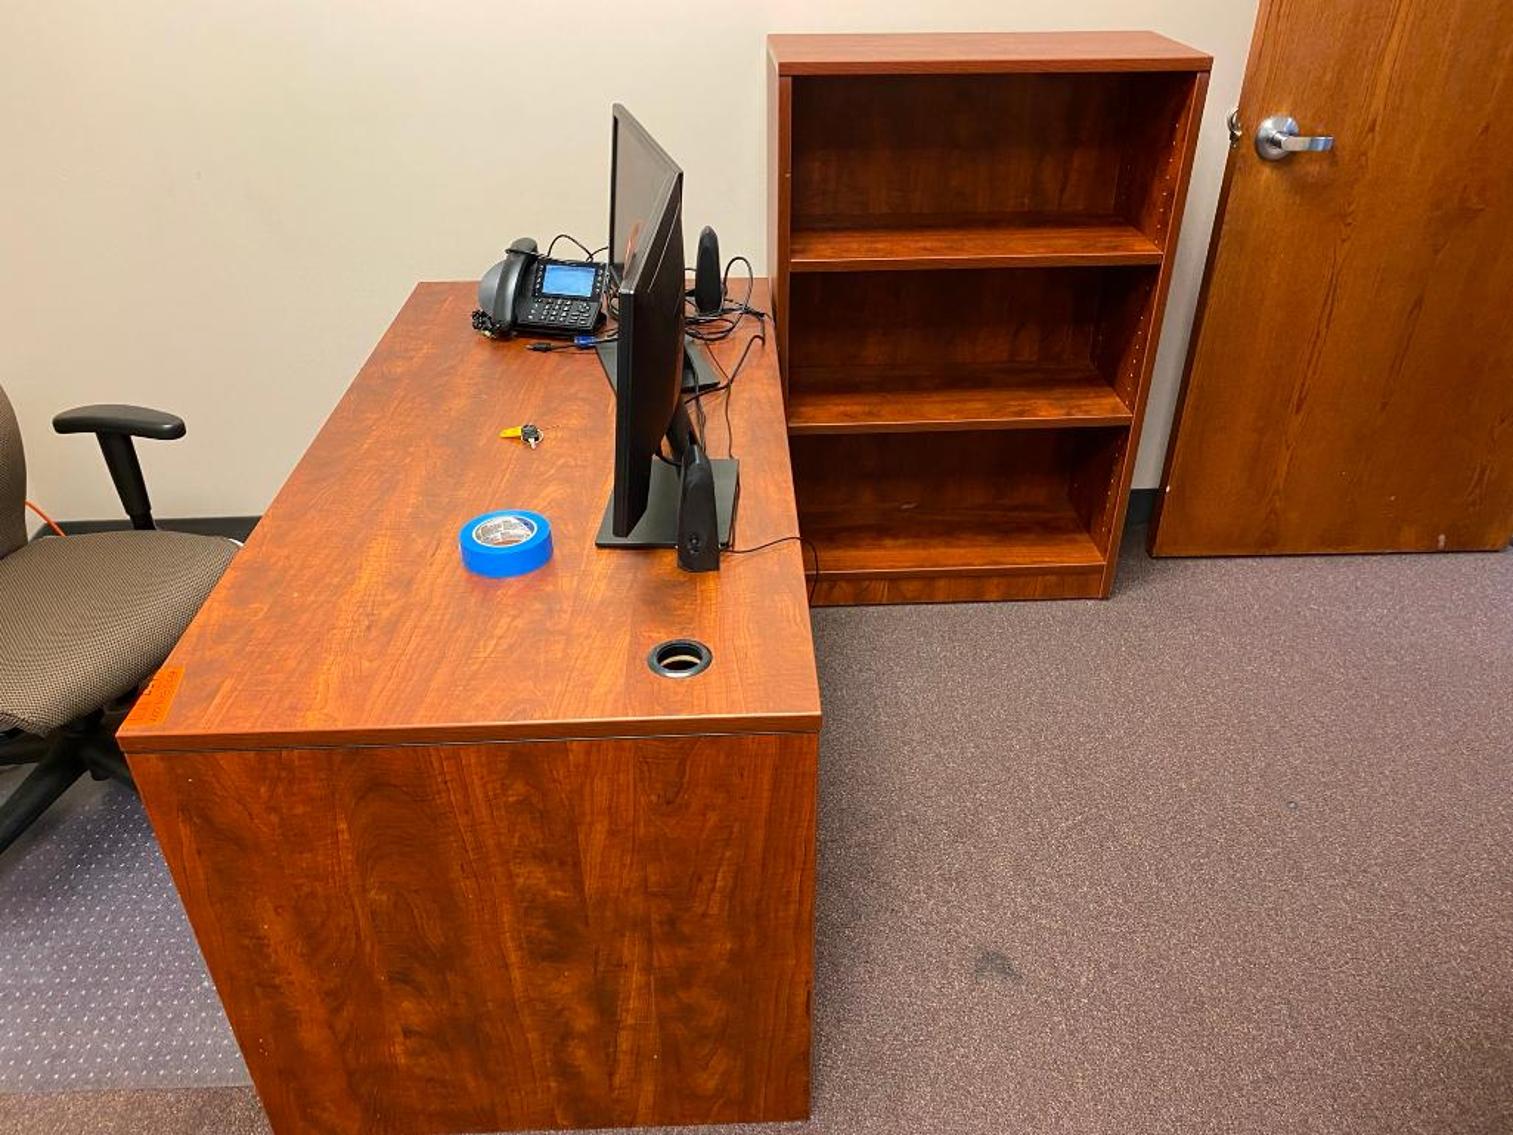 Phase 2: National Recoveries Inc Office Furniture Liquidation